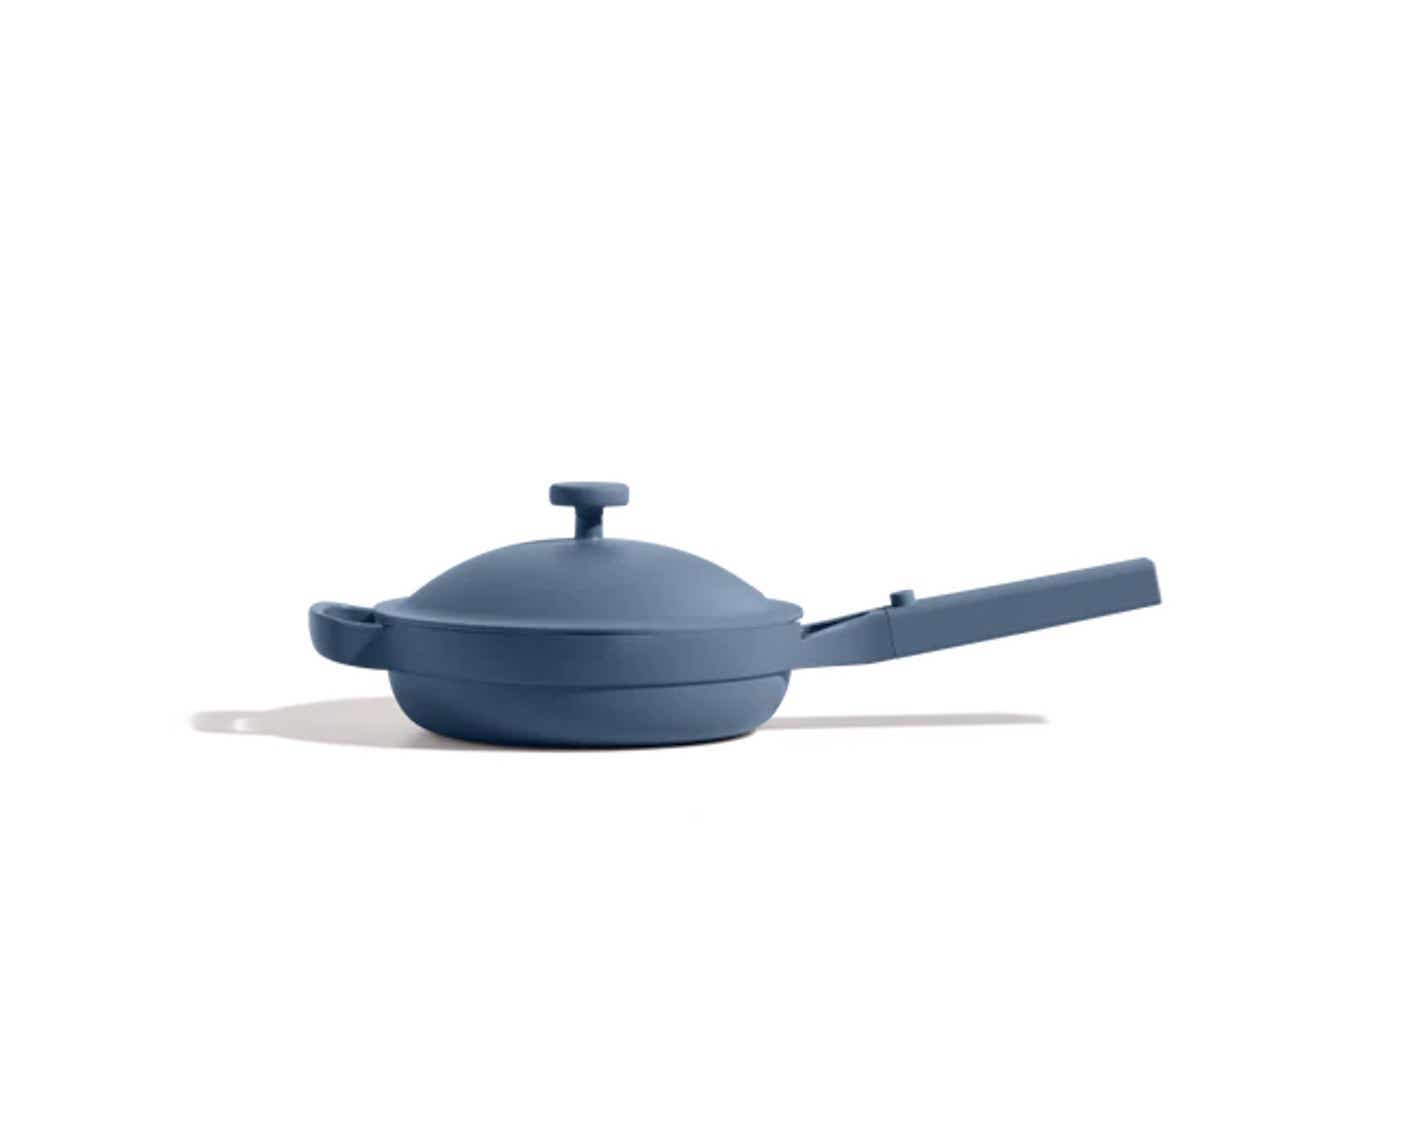 A blue, lidded pan sits in front of a white background.